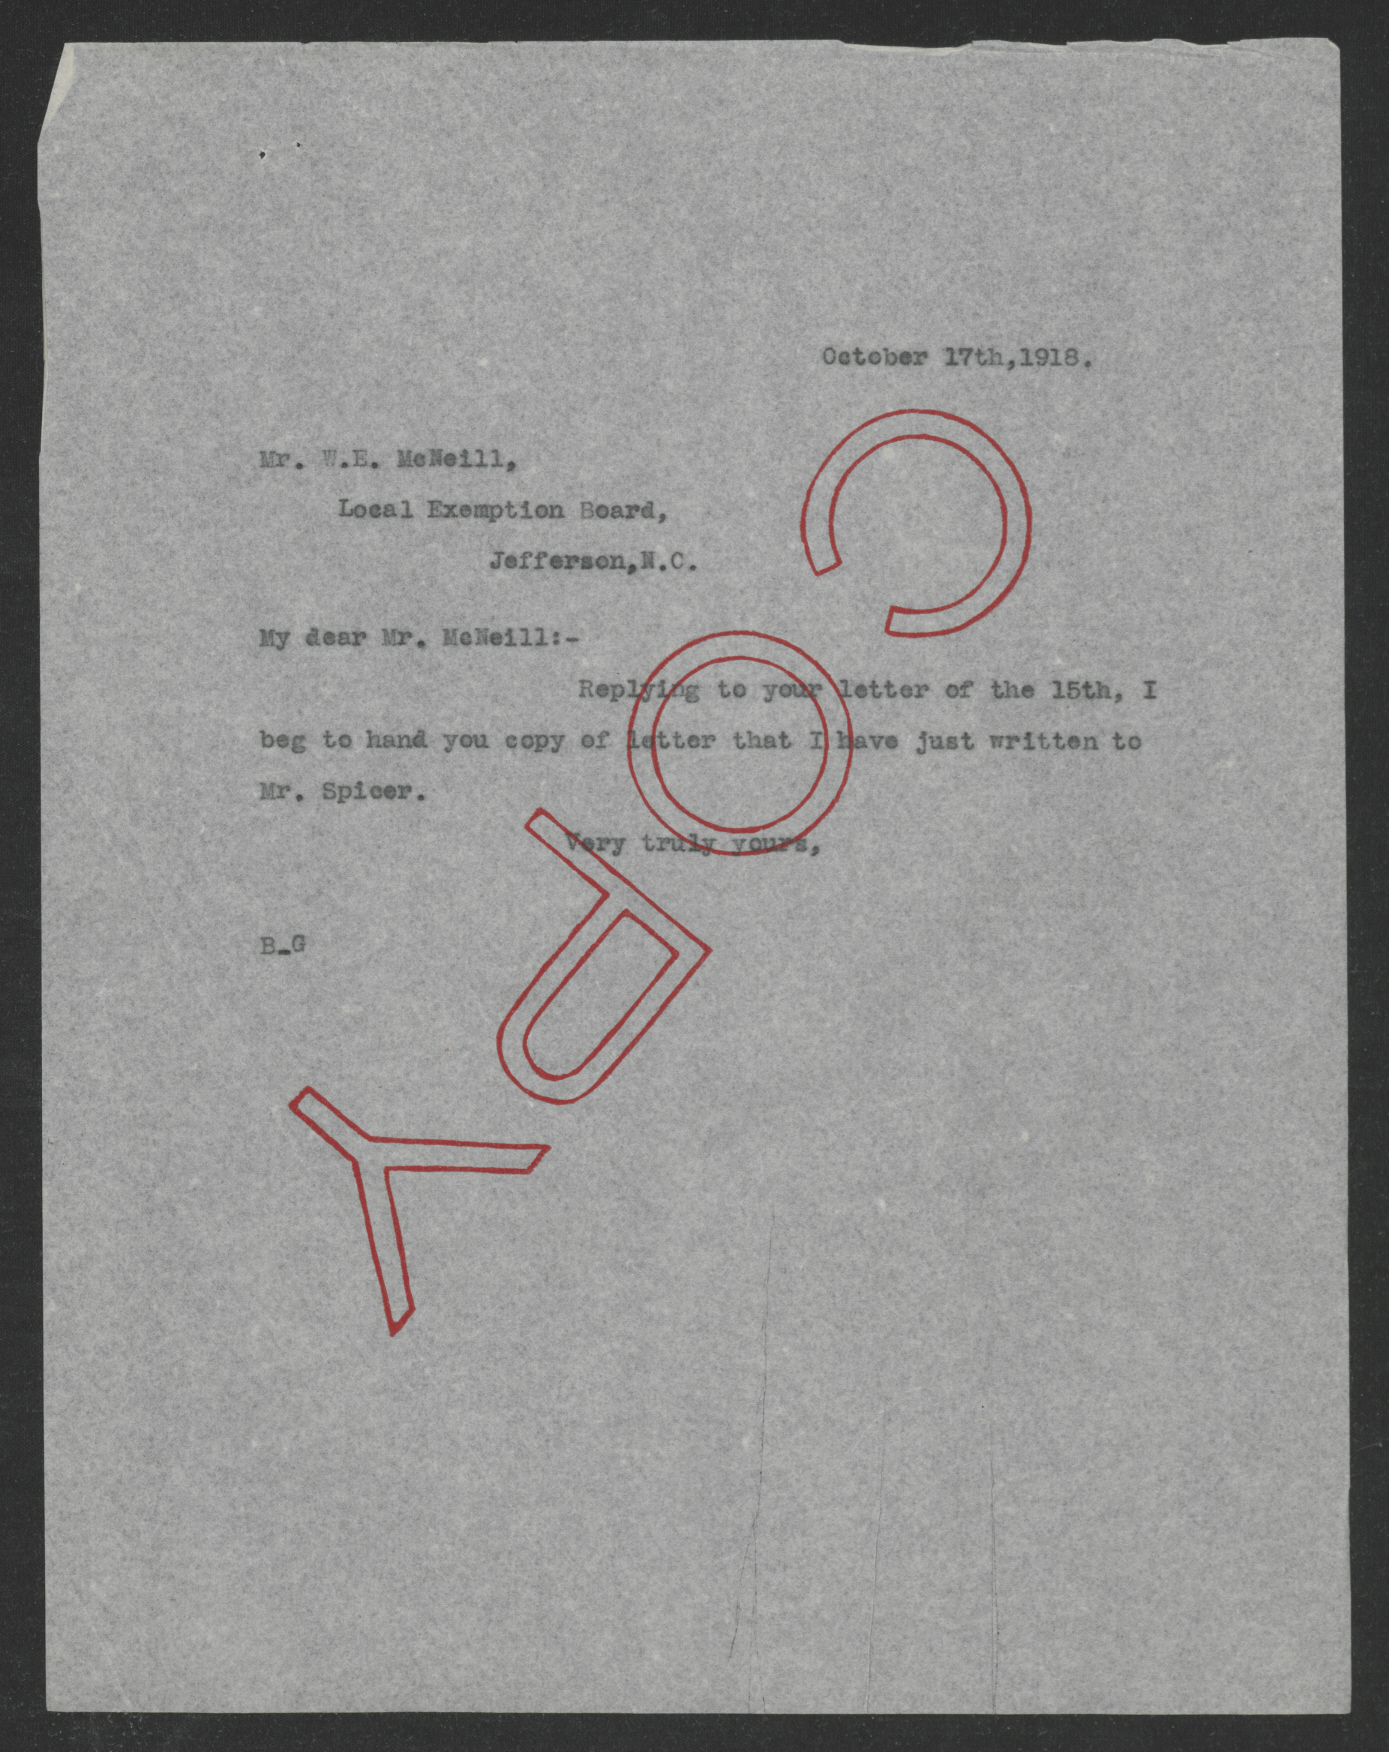 Letter from Thomas W. Bickett to Wiley E. McNeill, October 17, 1918